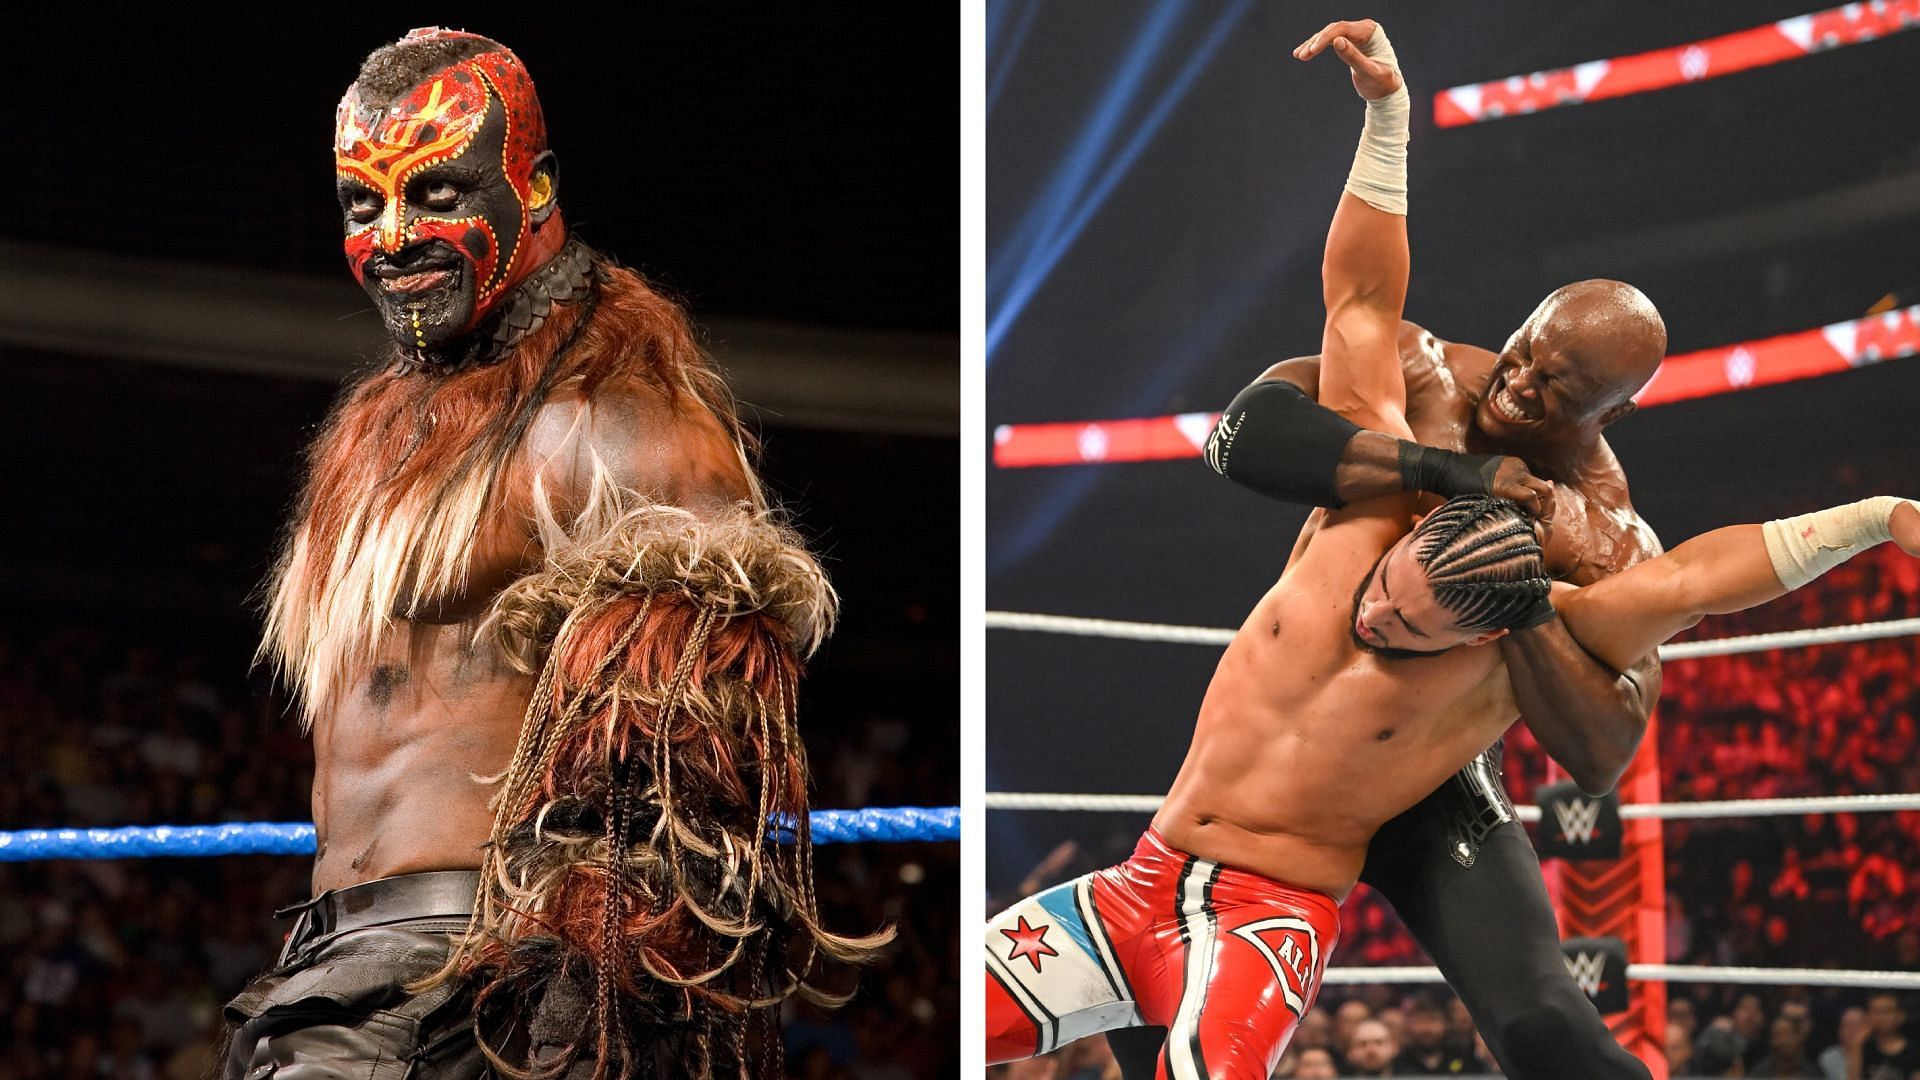 The Boogeyman could potentially return to WWE programming